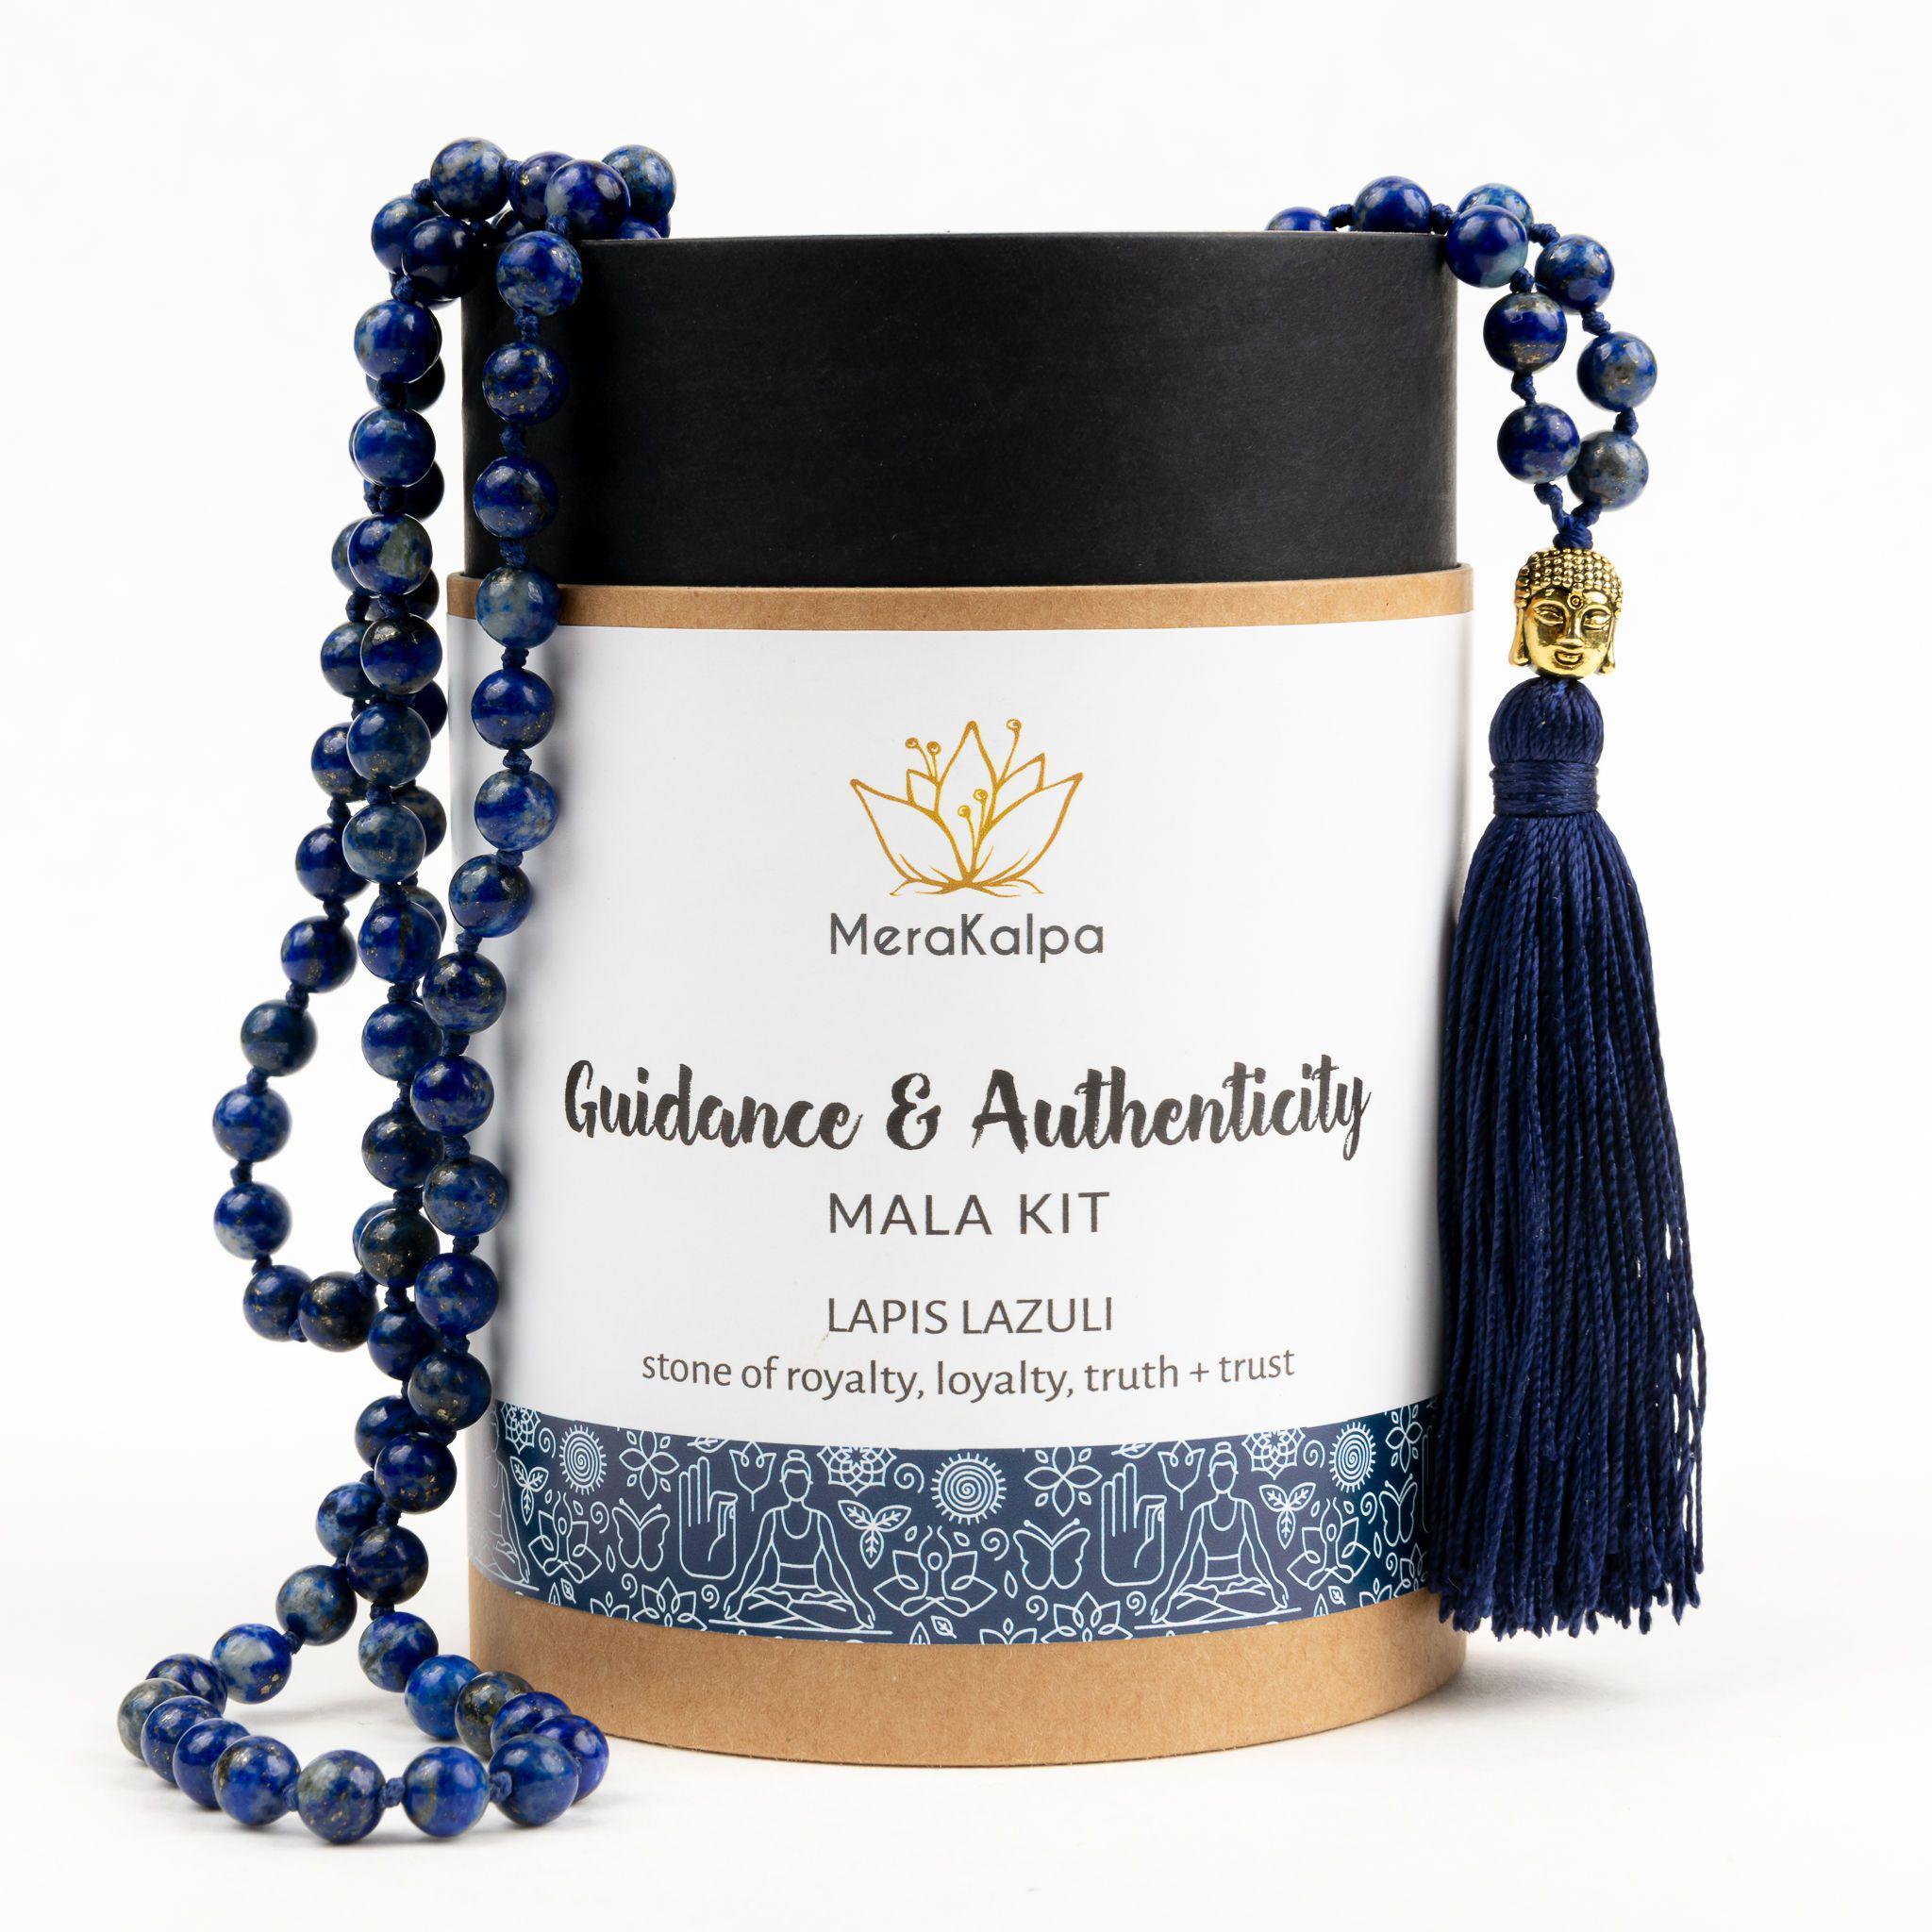 Lapis Lazuli Mala Necklace Kit for Intuition, Guidance